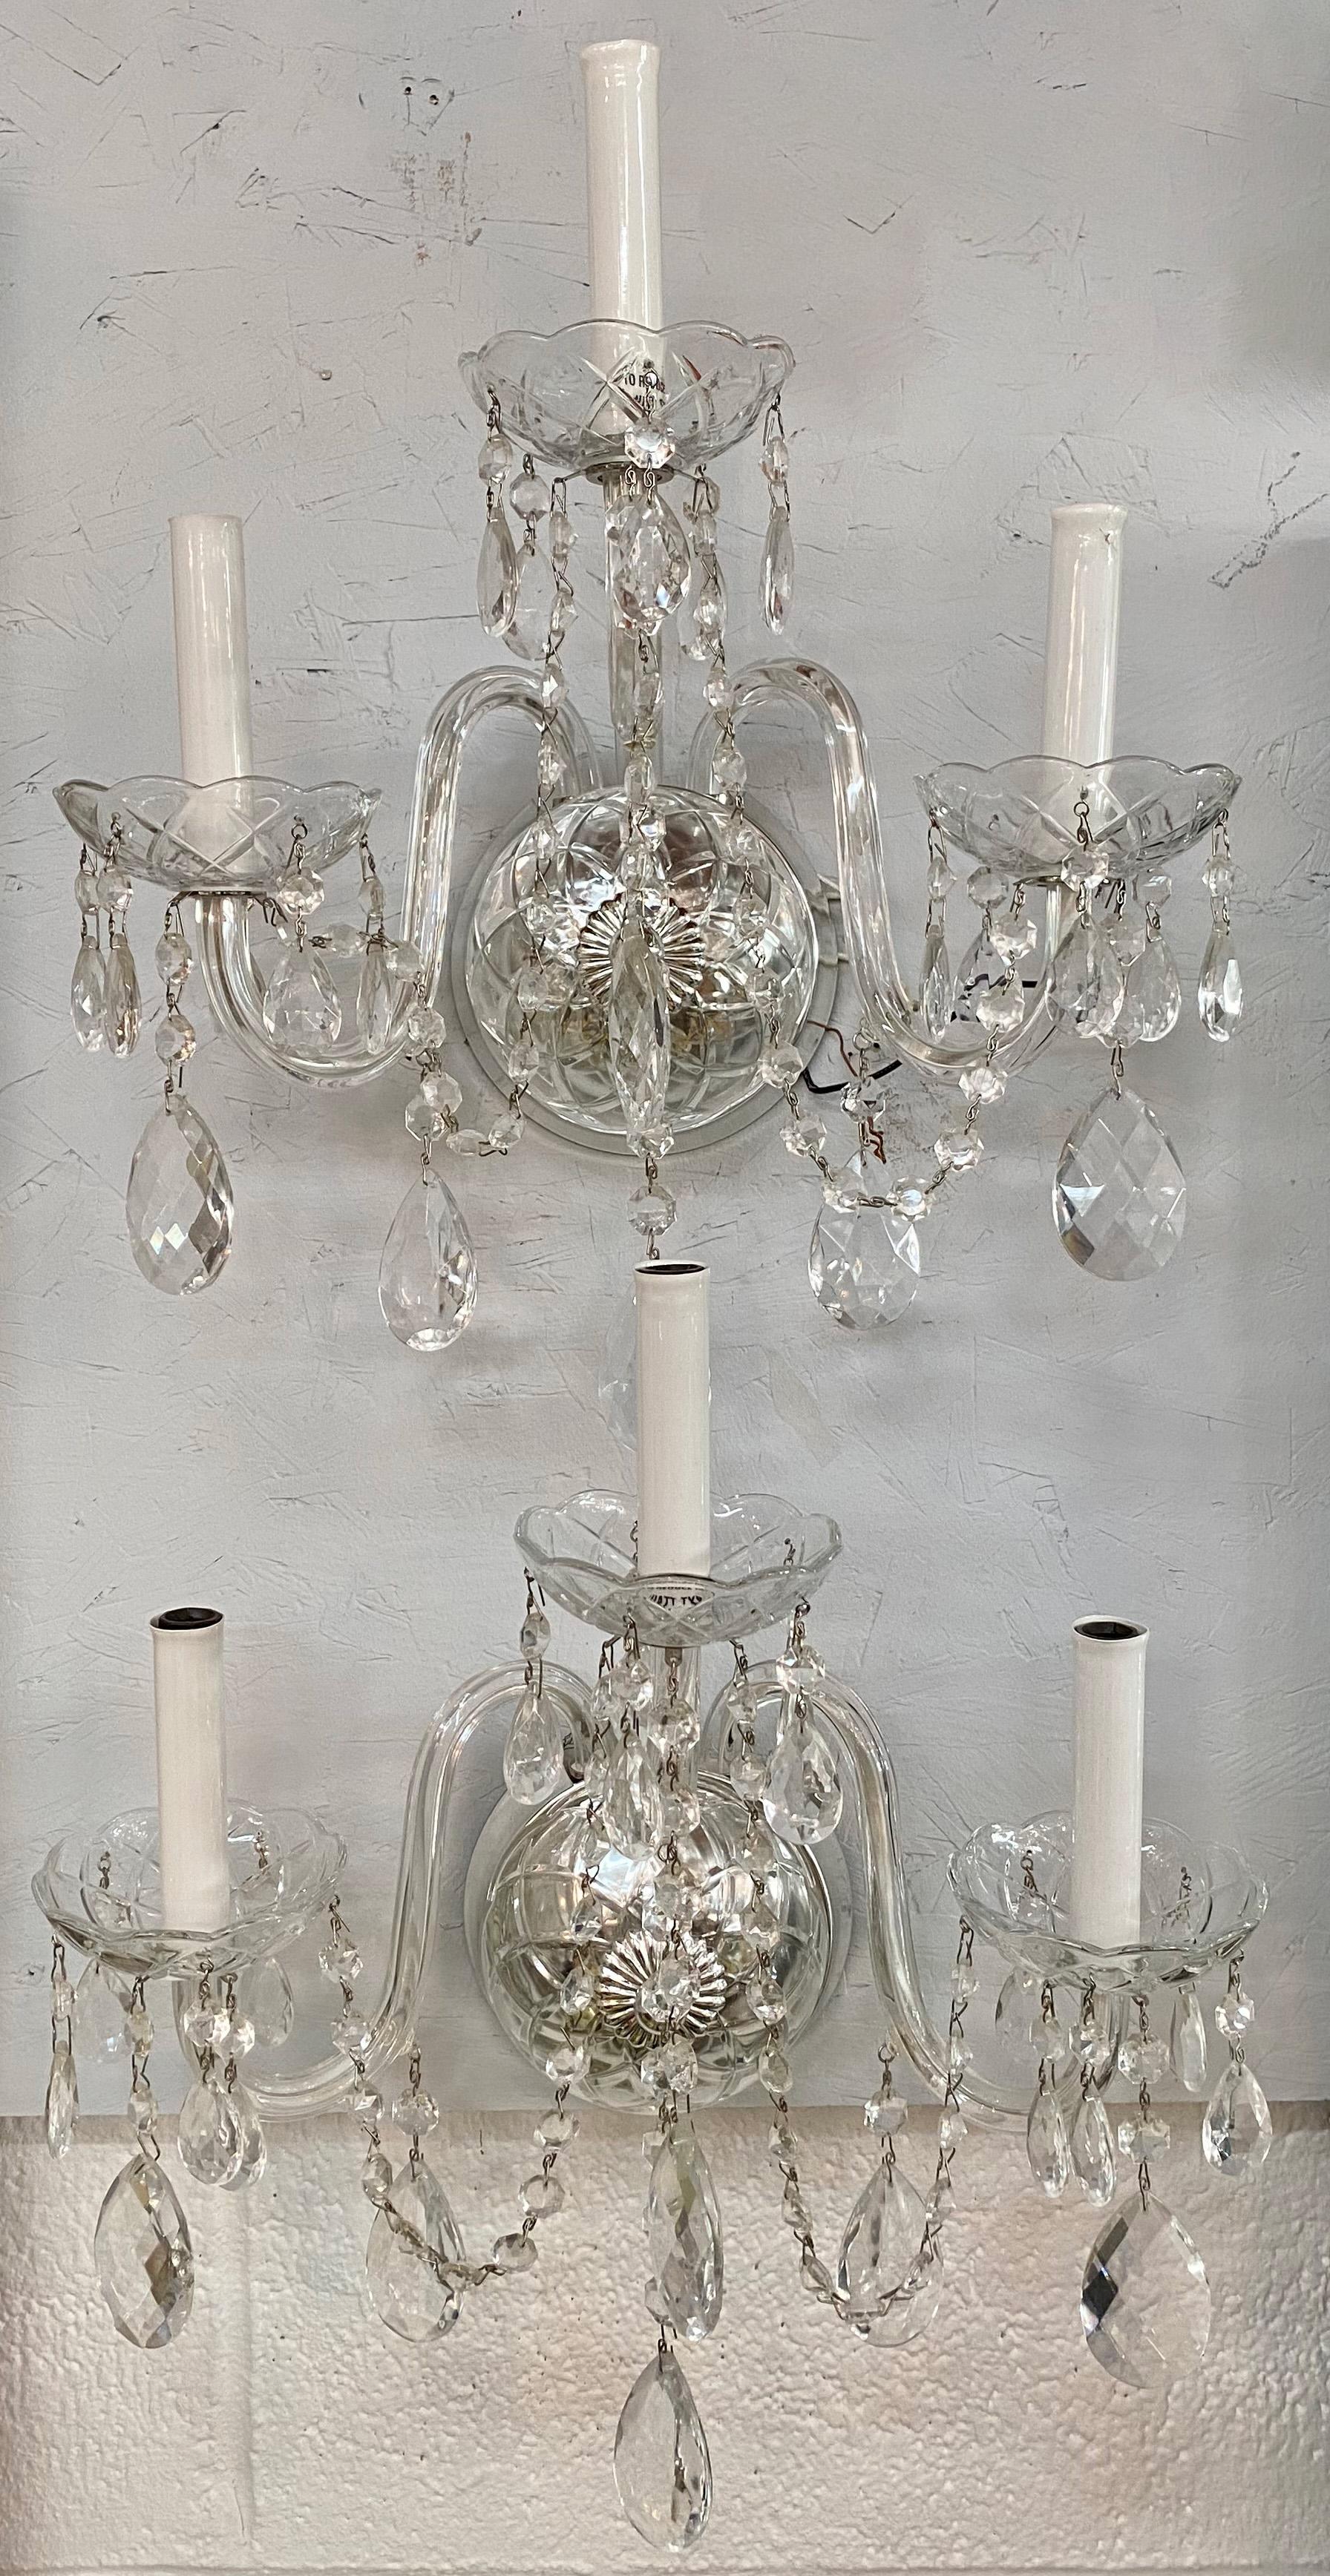  A remarkable pair of French Hollywood Regency style crystal wall sconces. These exquisite sconces are a tribute to timeless elegance and style. 
Crafted with meticulous attention to detail, each sconce features three gracefully curving arms, their